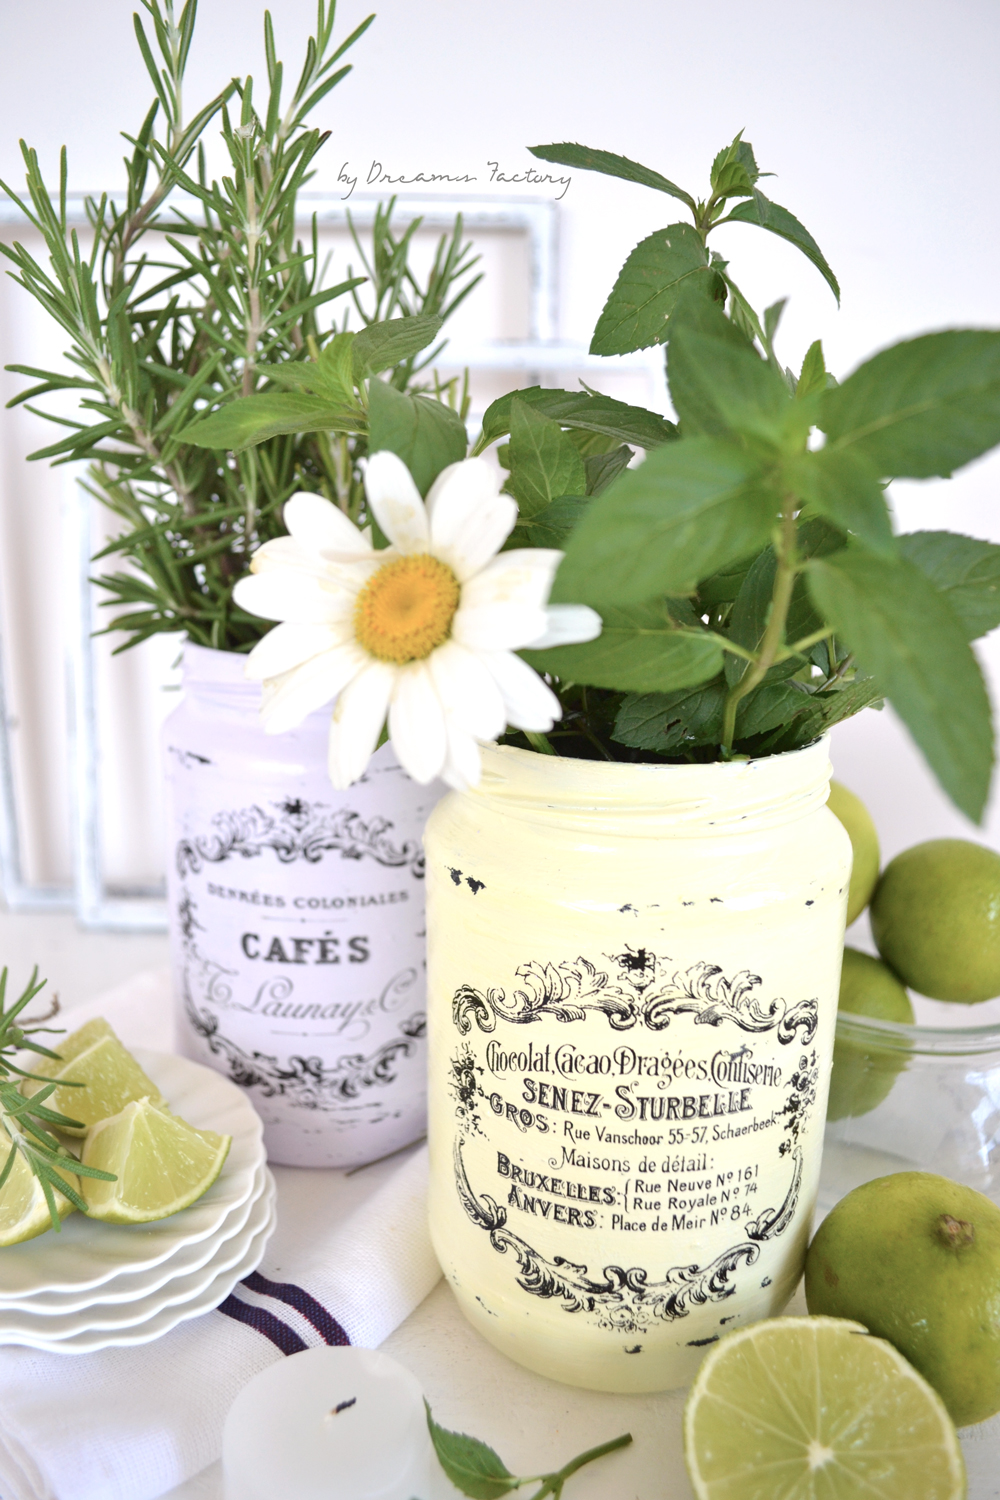 Easy Seasonal Decorating with French Jars, flowers, fruits, fresh herbs and essential oils for the most amazing vignettes for any season - Dreams Factory